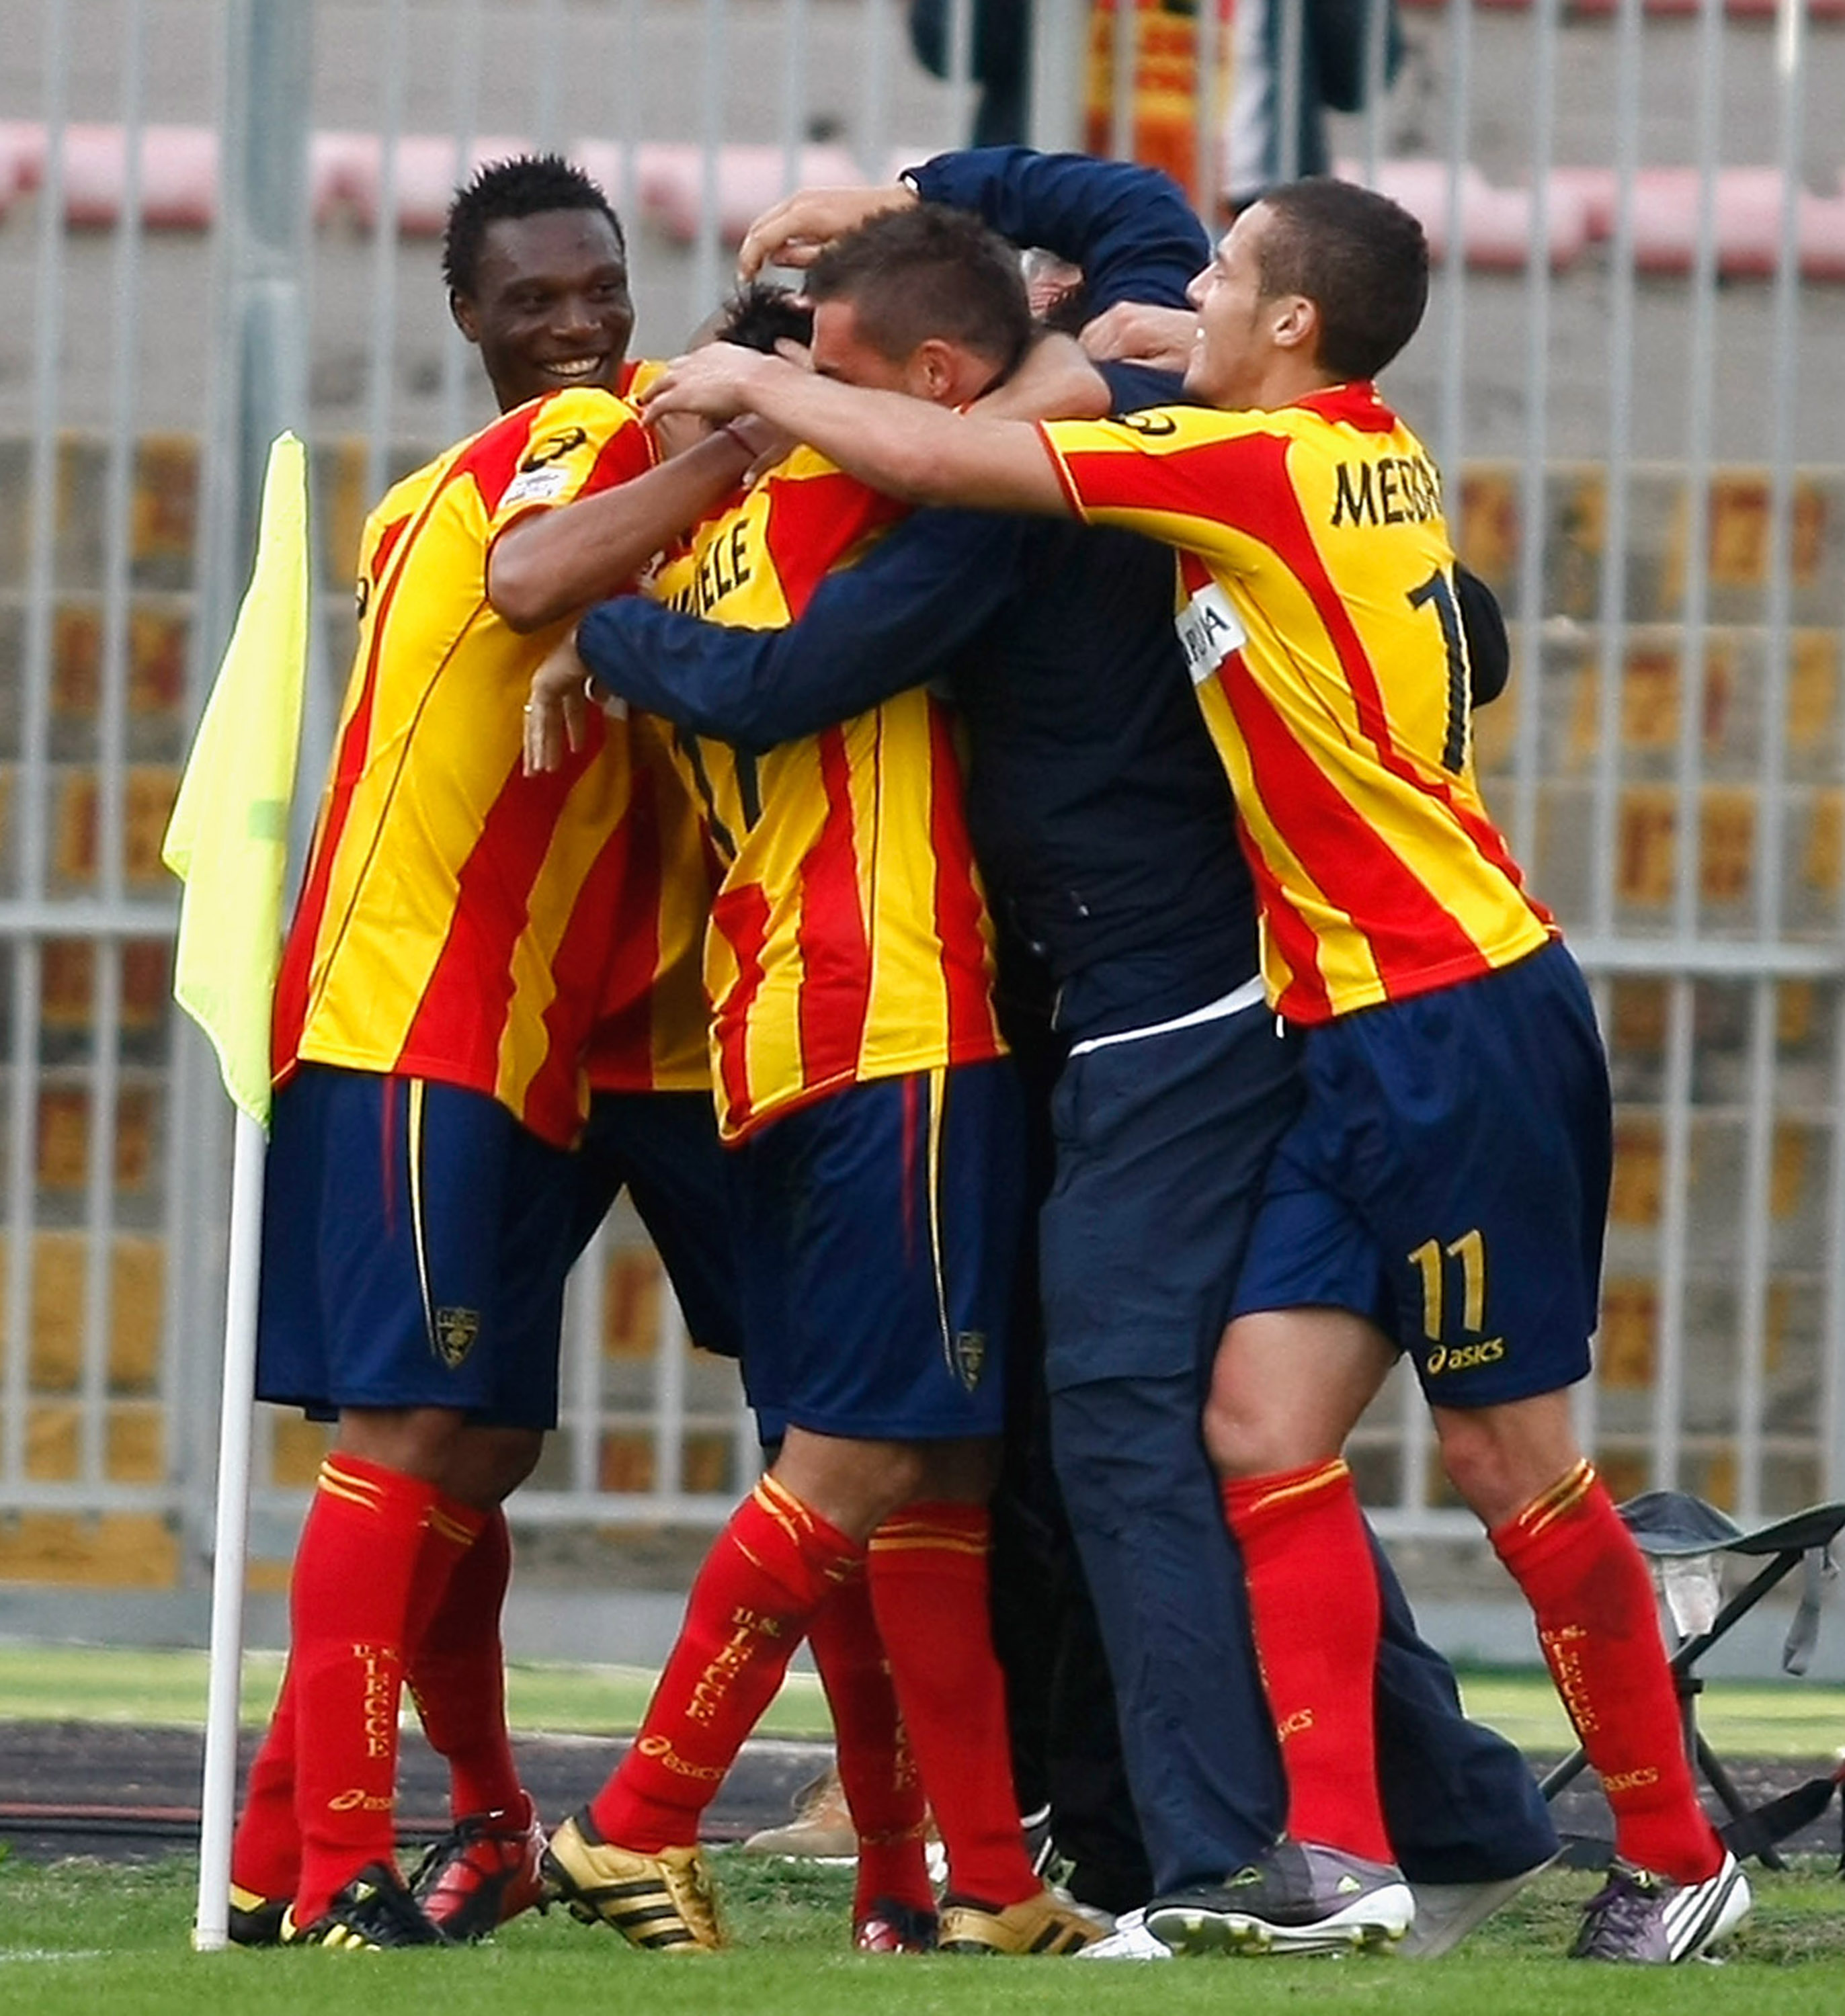 Lecce celebrate a goal by David Di Michele that turned out to be the game winnner.